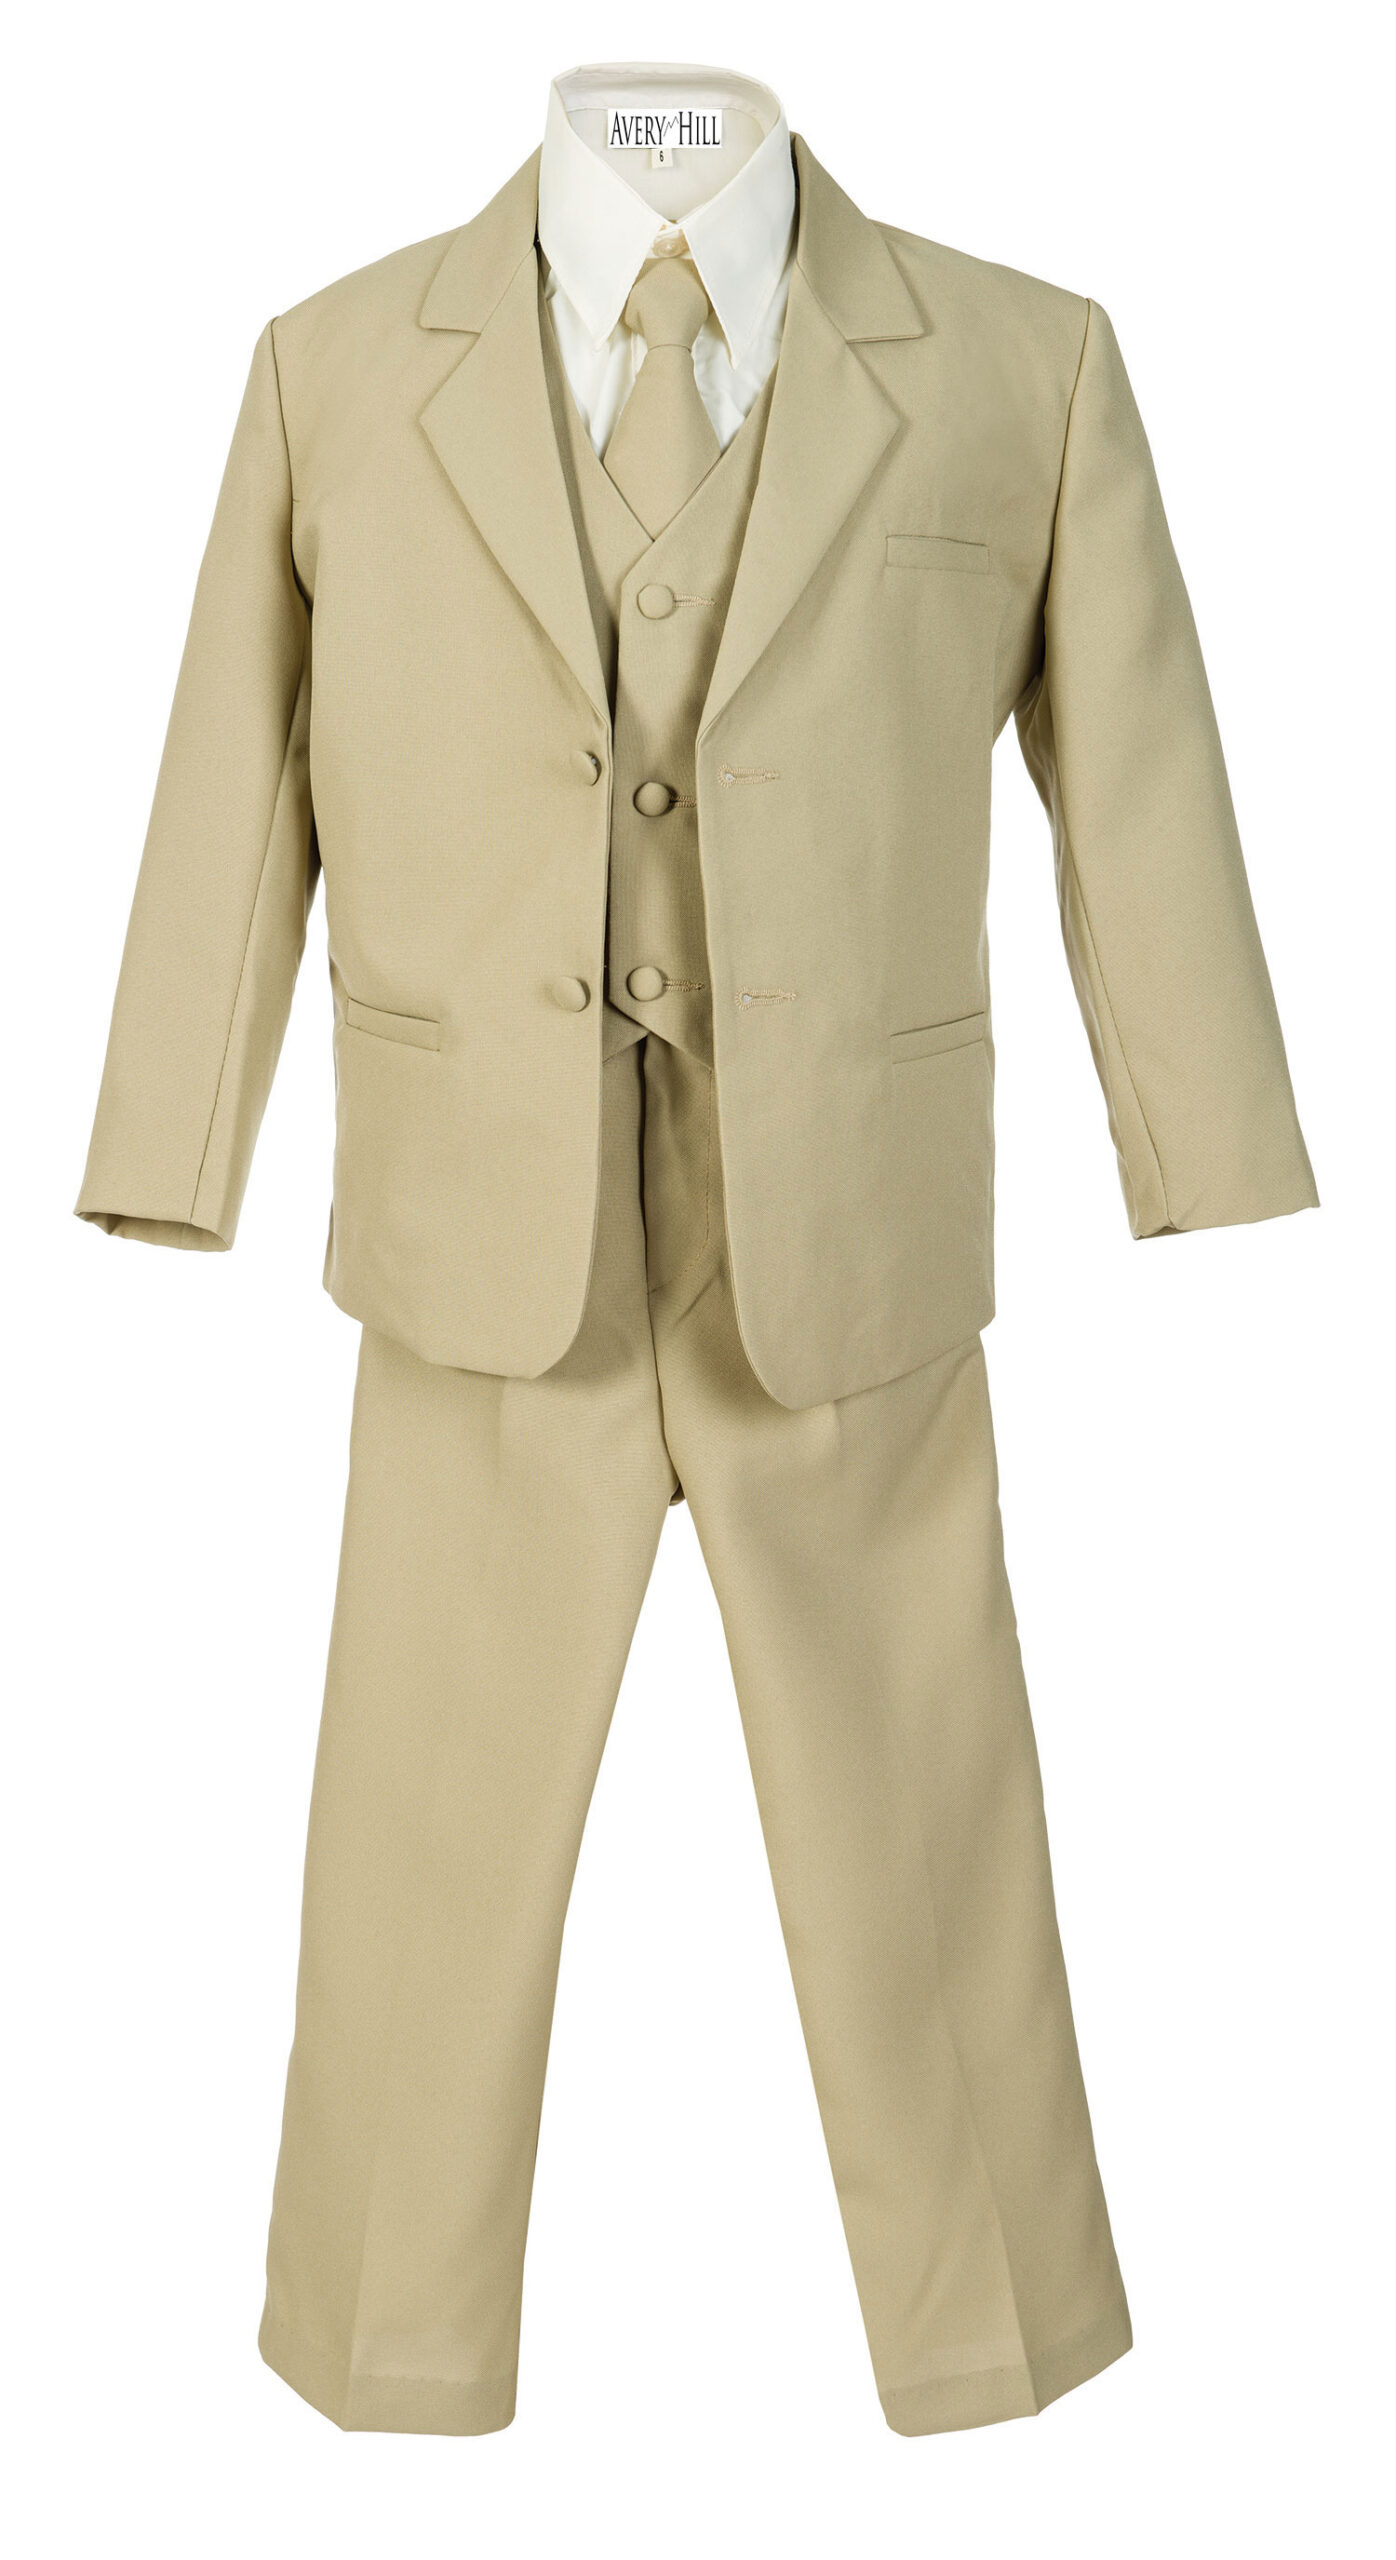 Avery Hill Boys Formal 5 Piece Suit with Shirt and Vest Khaki - 16